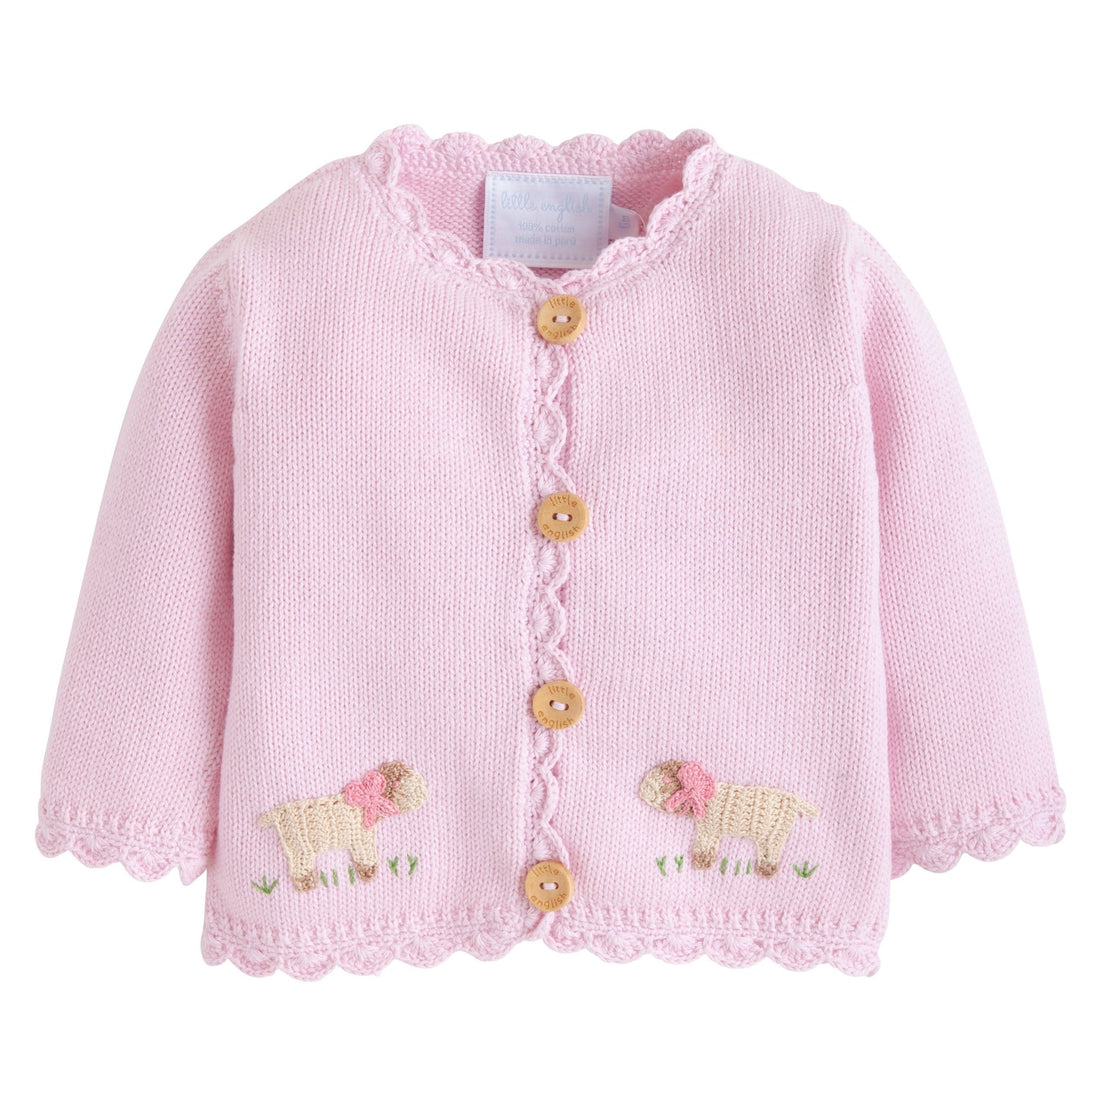 Little English signature crochet sweater for baby girl, traditional pink sheep crochet sweater for baby girl